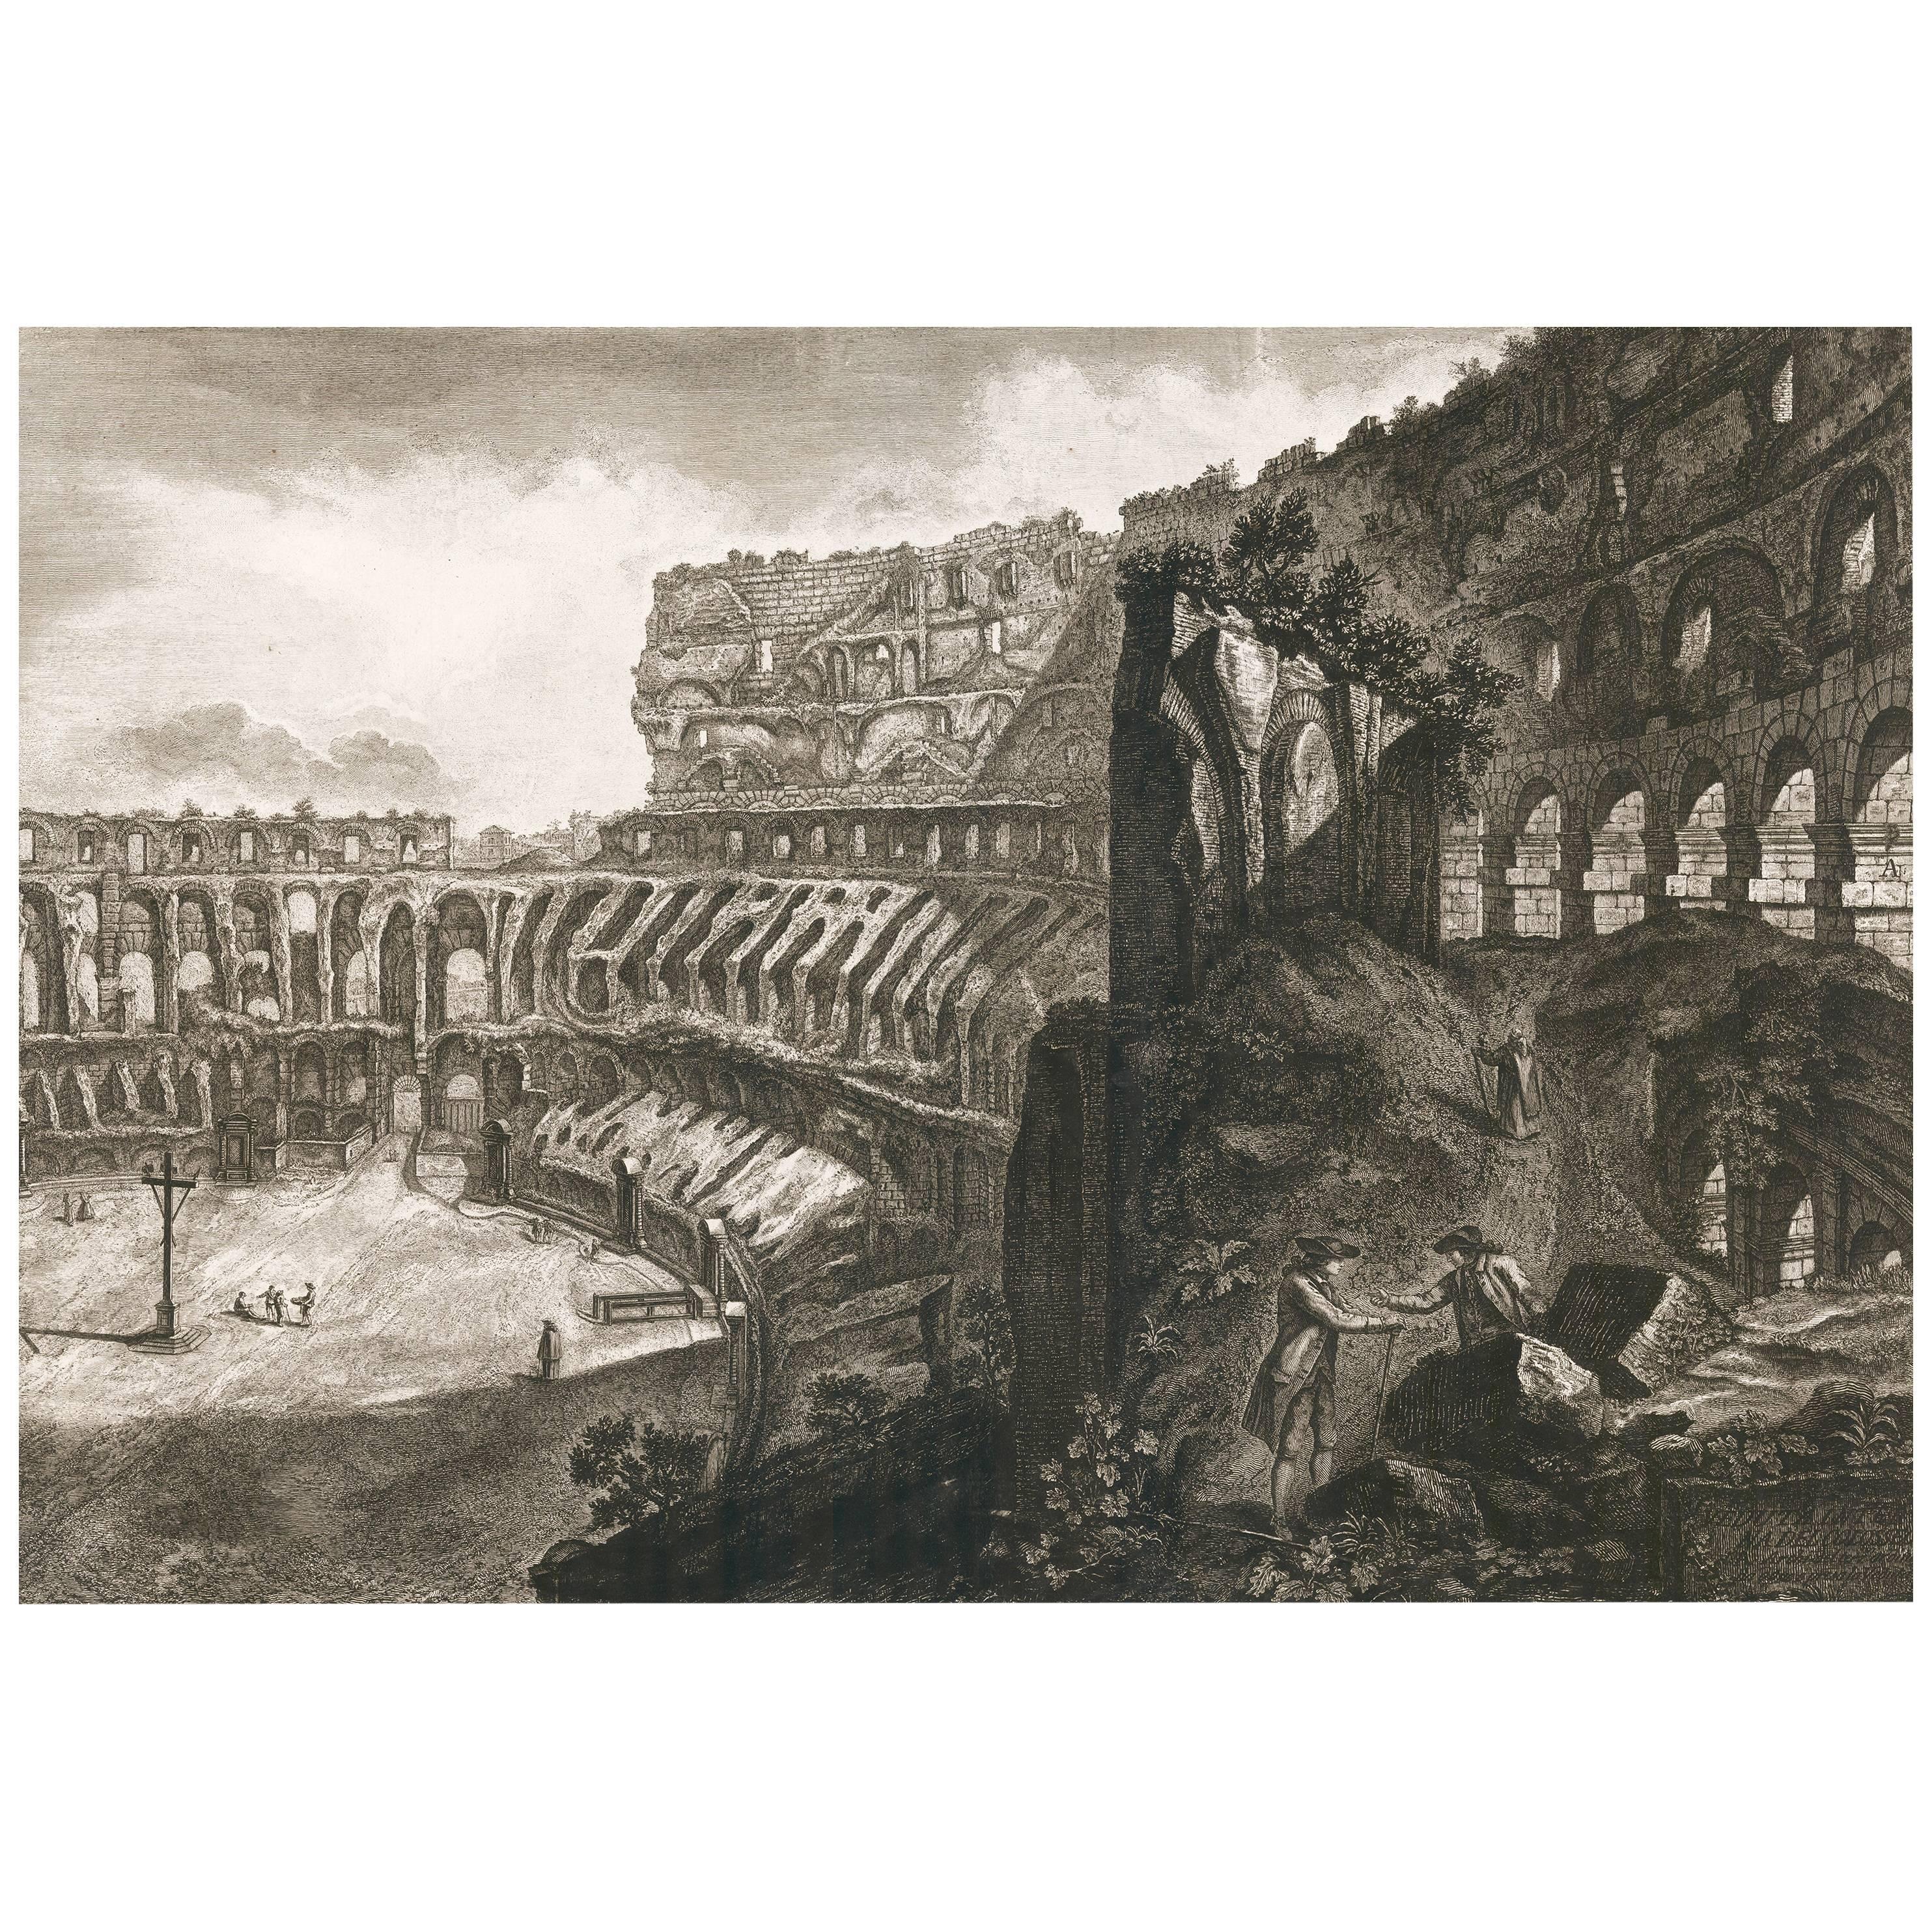 View of the Interior of the Colosseum by Francesco Piranesi, 1835